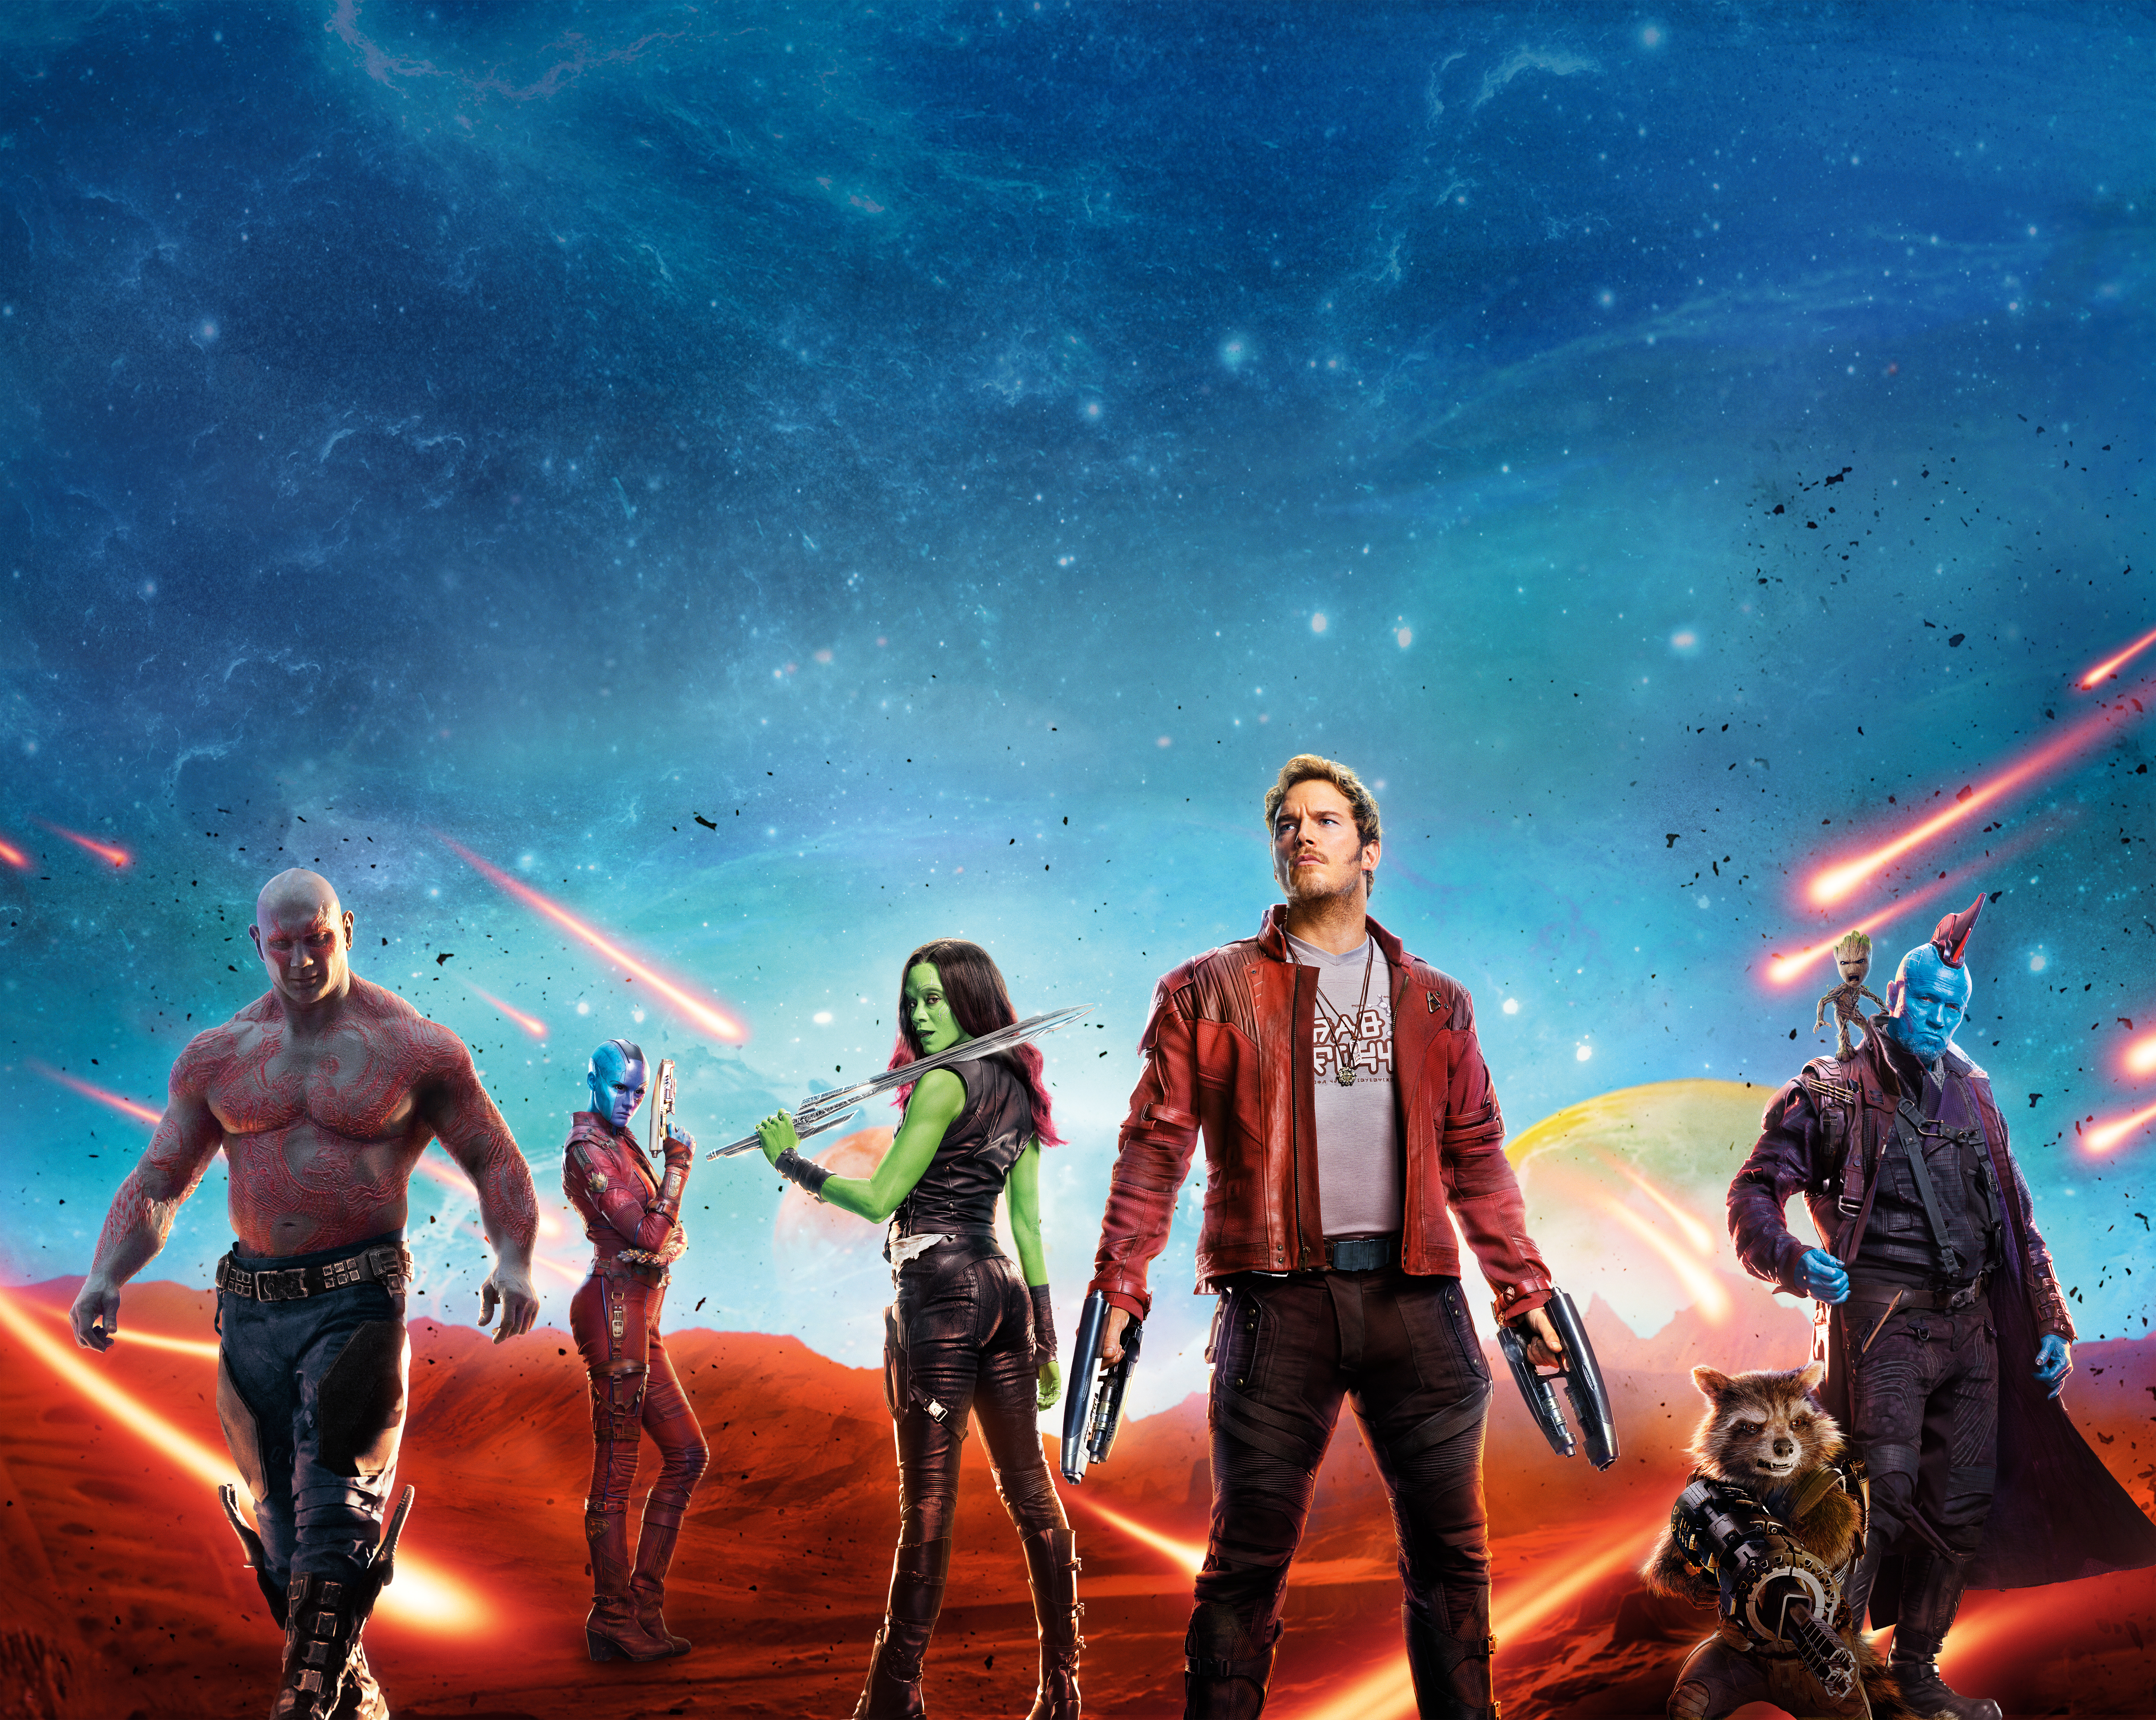 Wallpapers film adventure Guardians of the Galaxy Part 2 2017 on the desktop